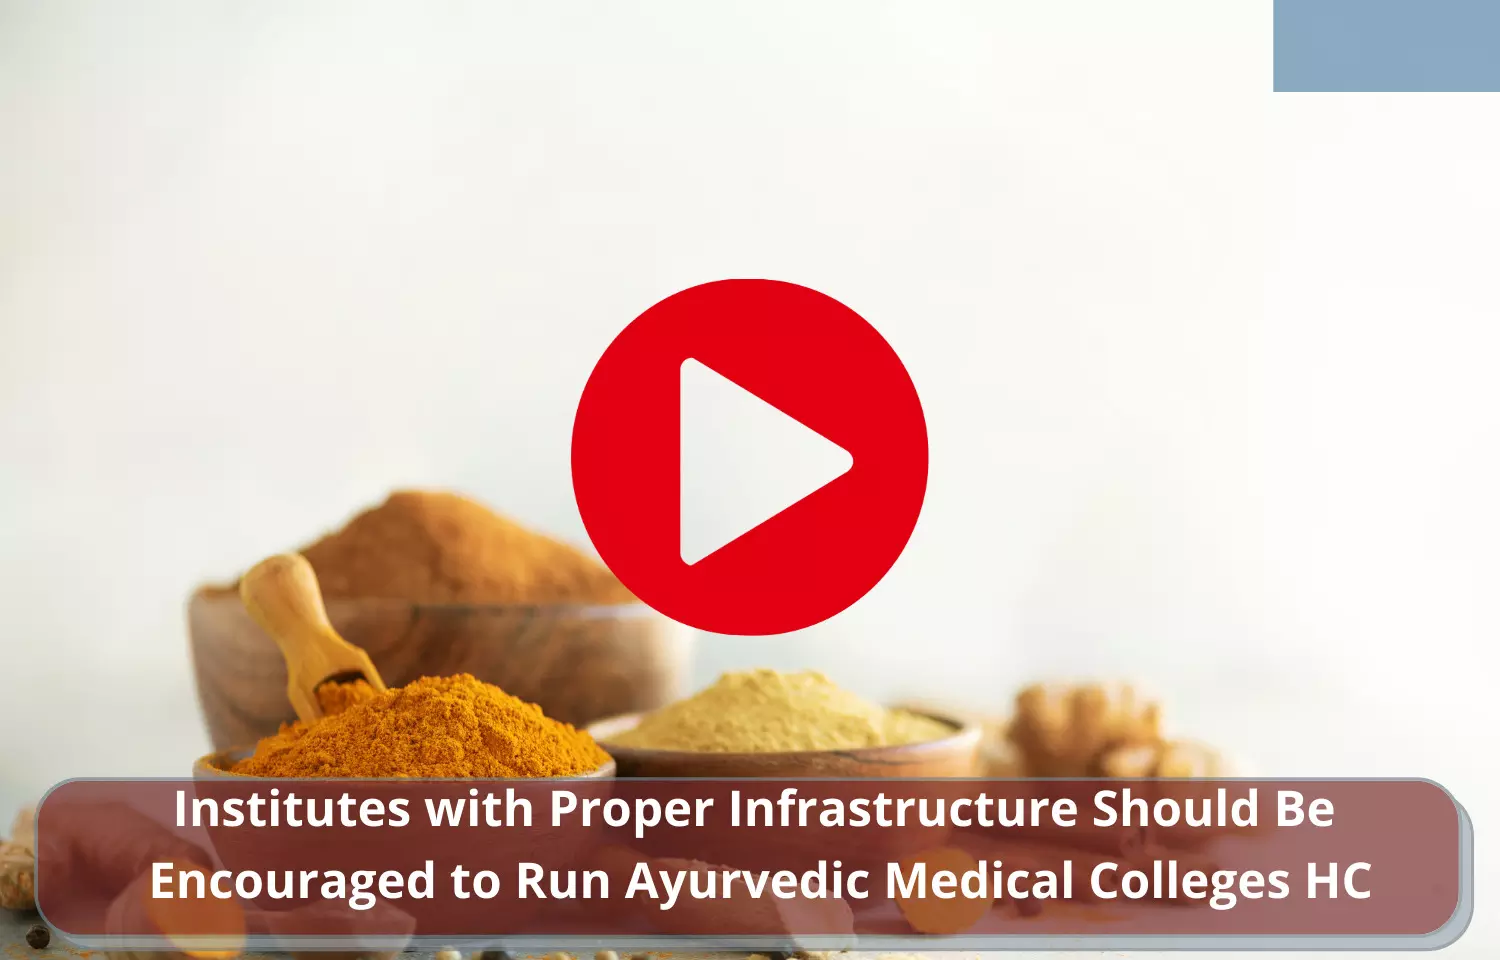 Institutes with necessary infrastructure should be encouraged to set up Ayurvedic Medical Colleges, opines Delhi HC